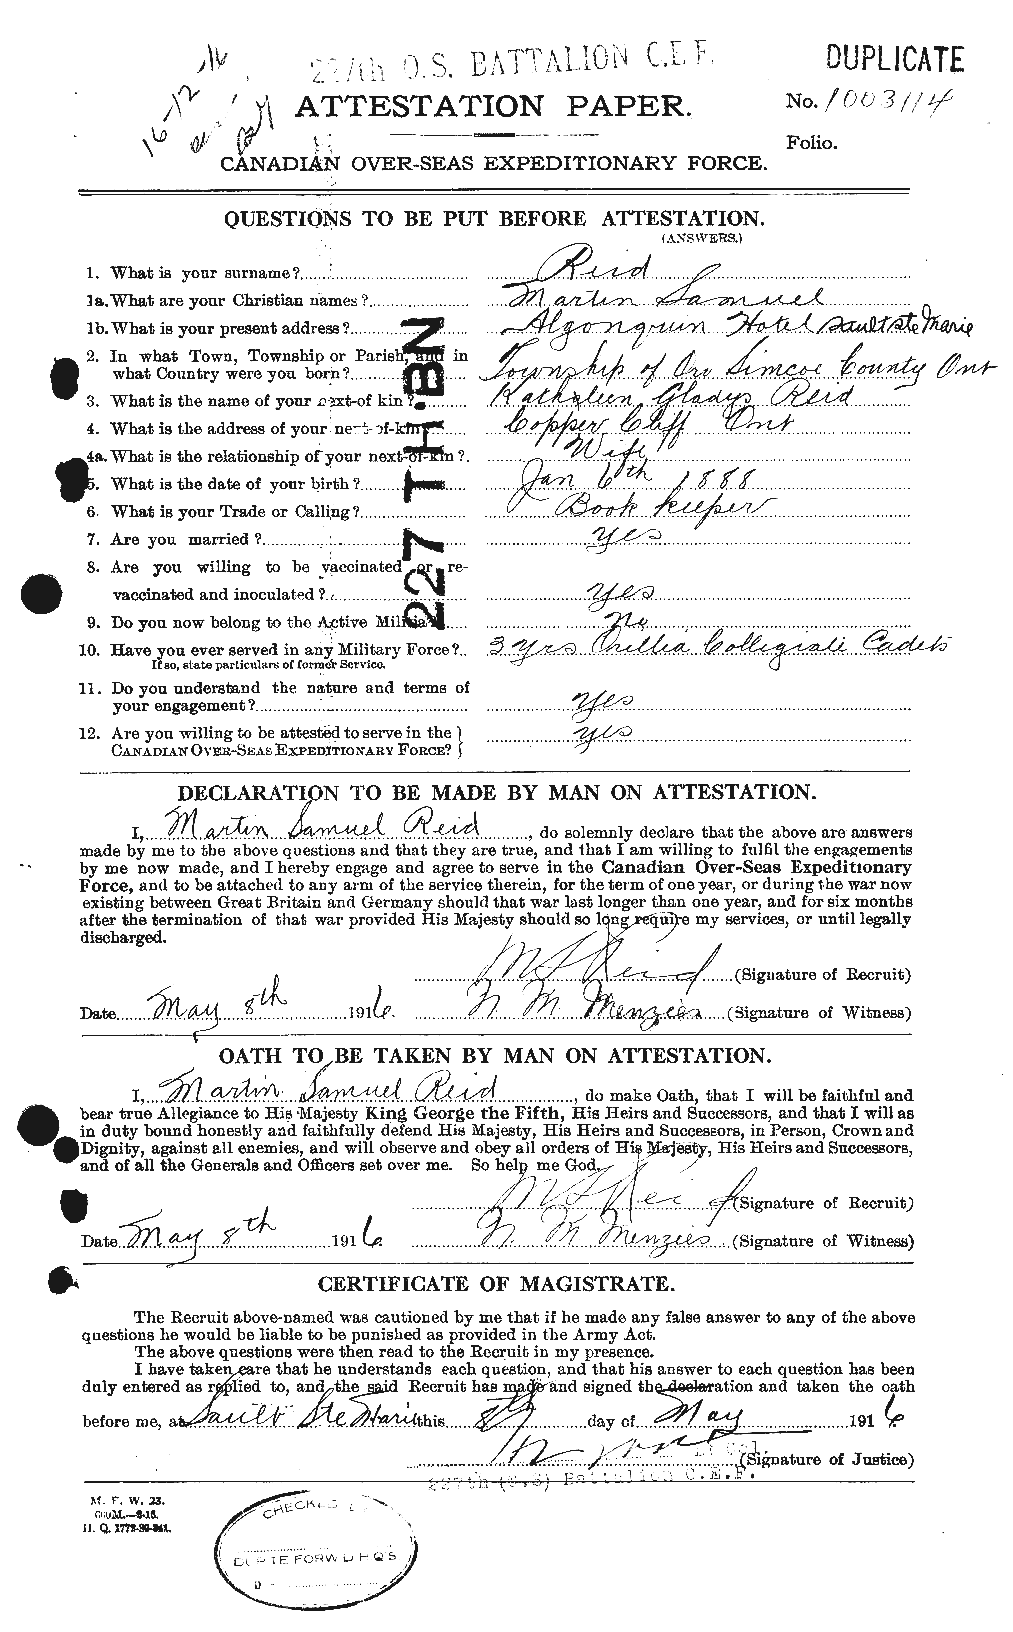 Personnel Records of the First World War - CEF 598943a